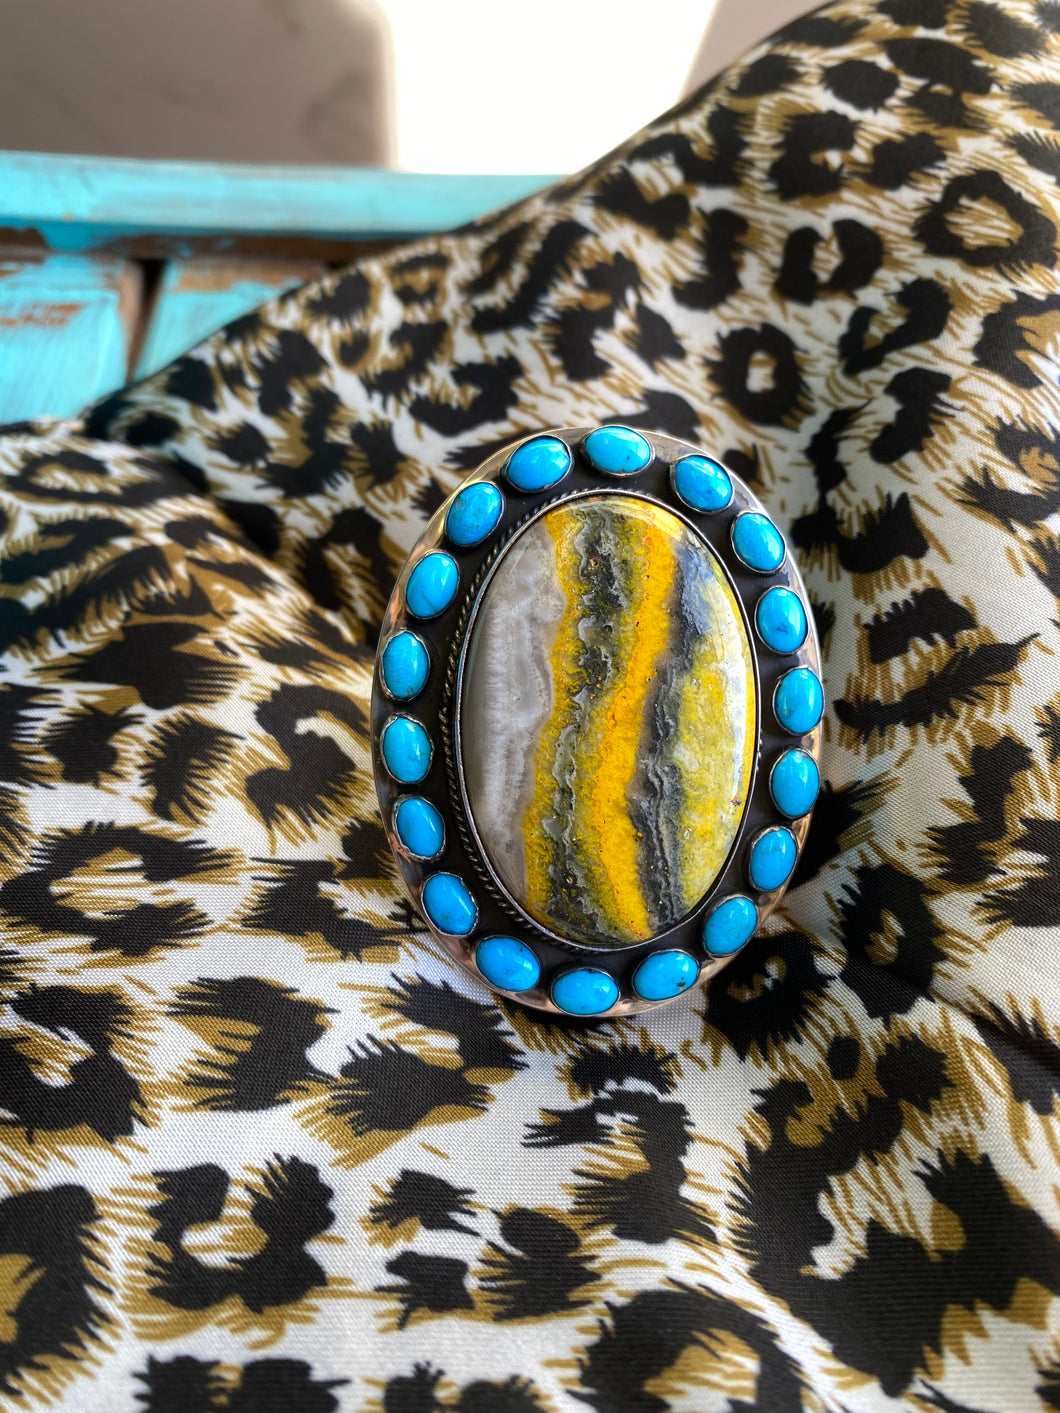 Bumble bee Jasper and Sleeping beauty turquoise Large Statement ring - size 8-8.5